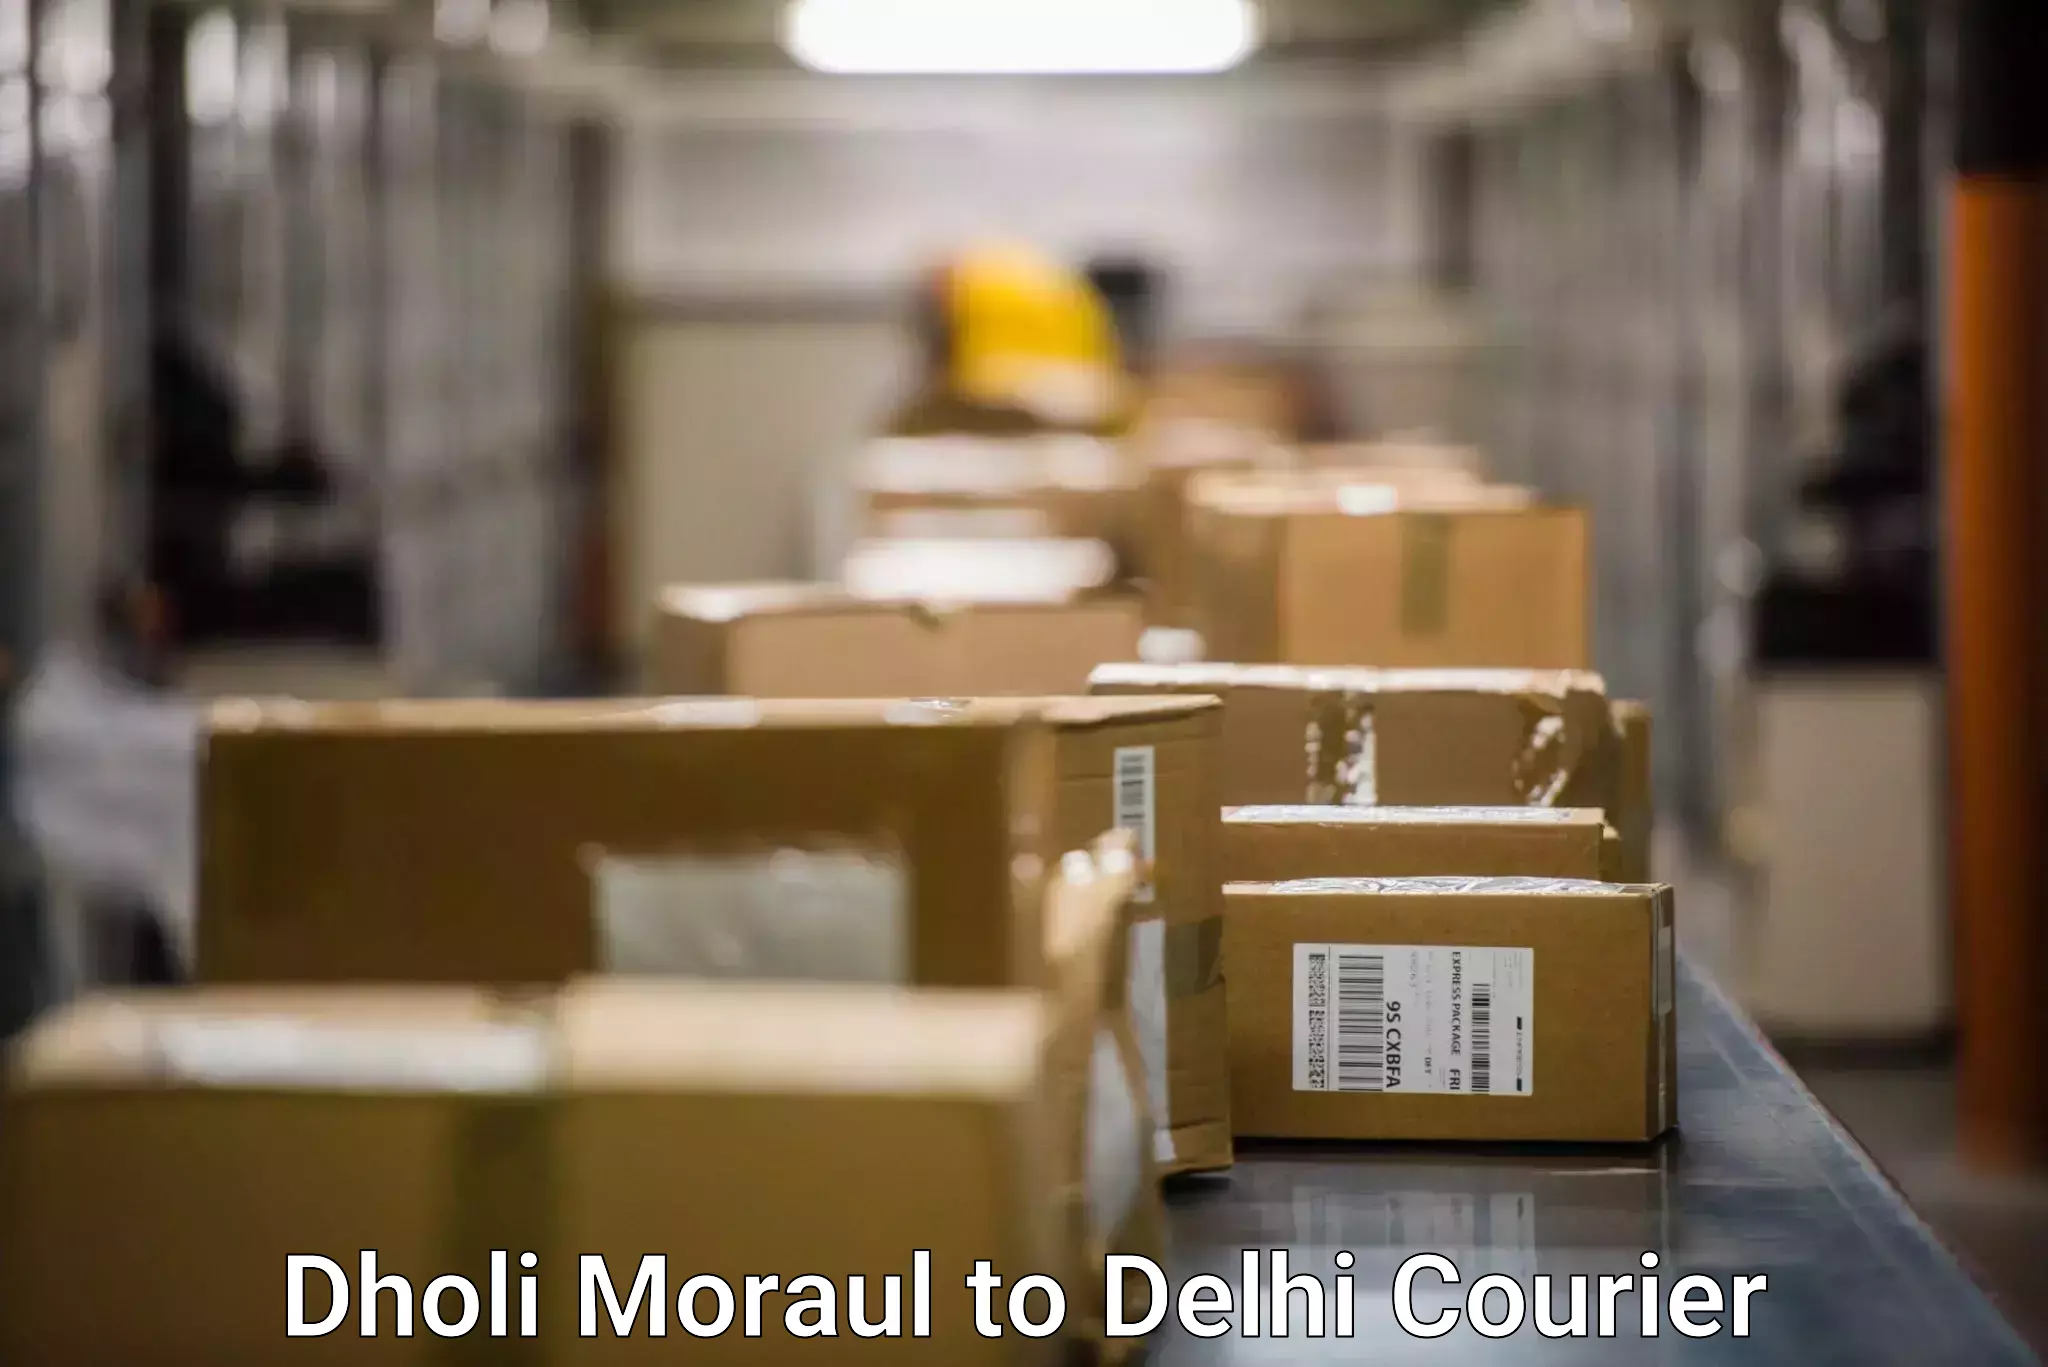 Personal courier services Dholi Moraul to Lodhi Road